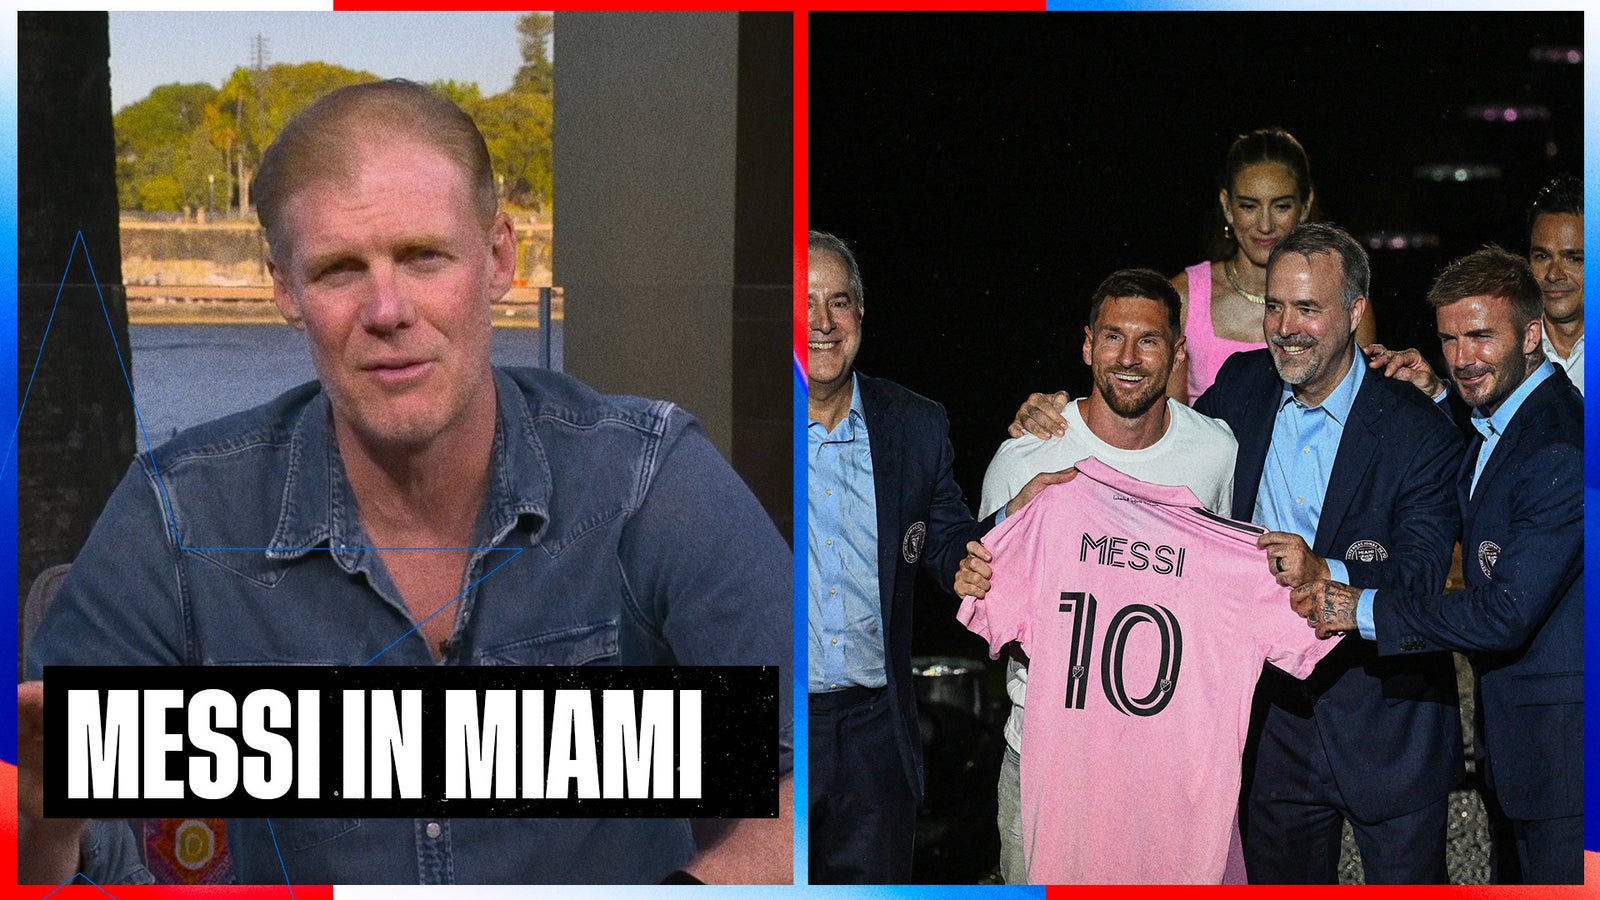 What impact can Lionel Messi have with Inter Miami, MLS?